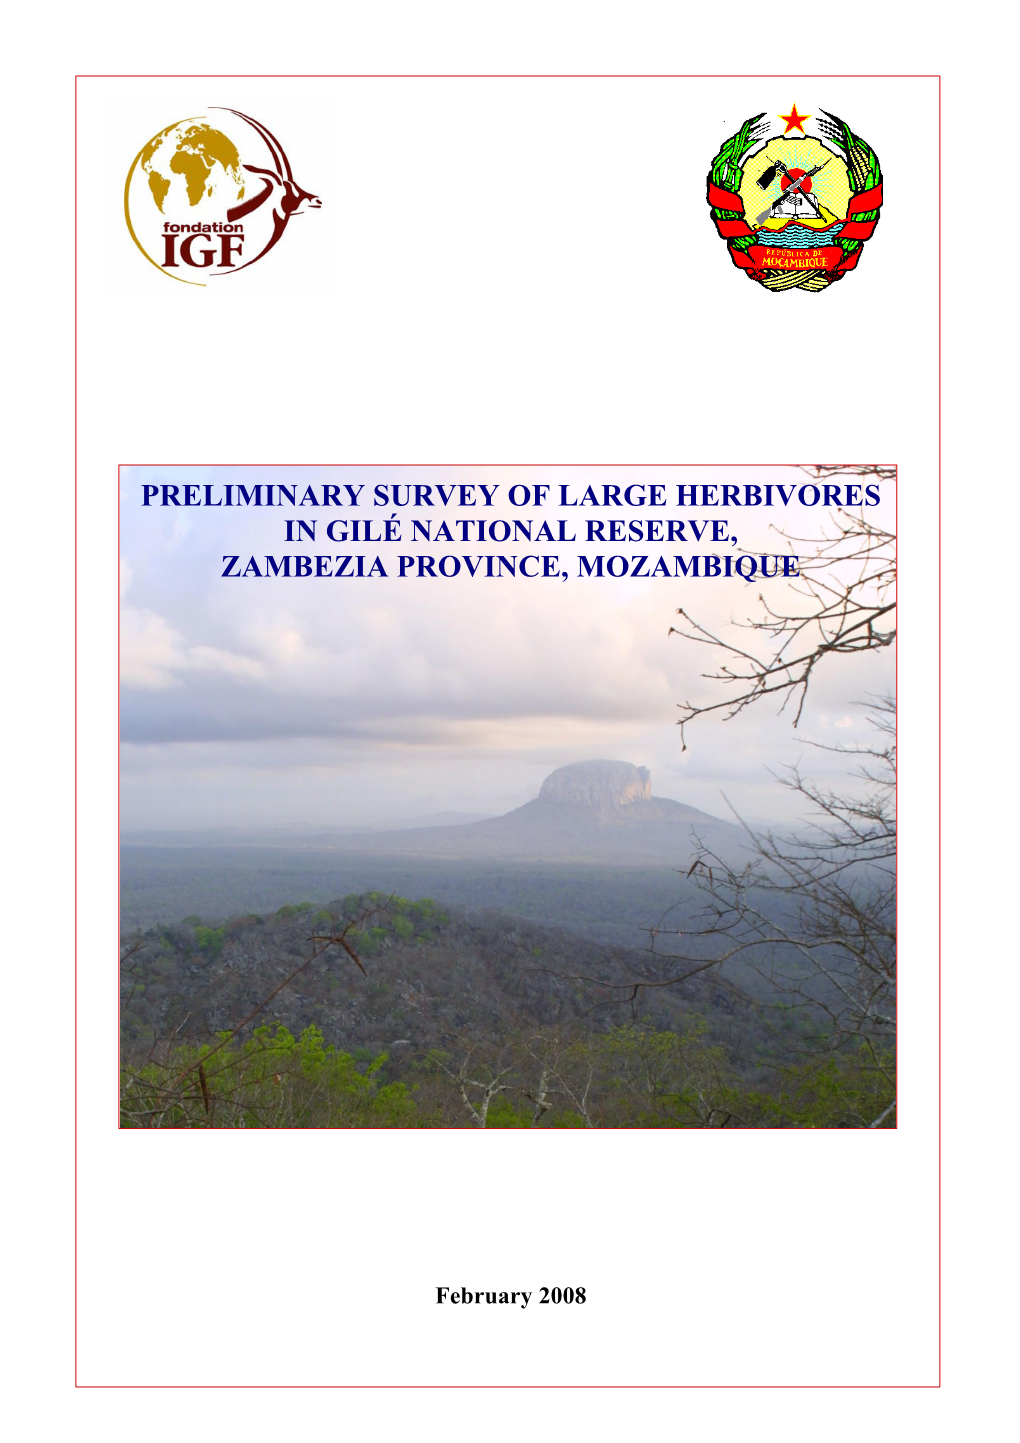 Preliminary Survey of Large Herbivores in Gilé National Reserve, Zambezia Province, Mozambique